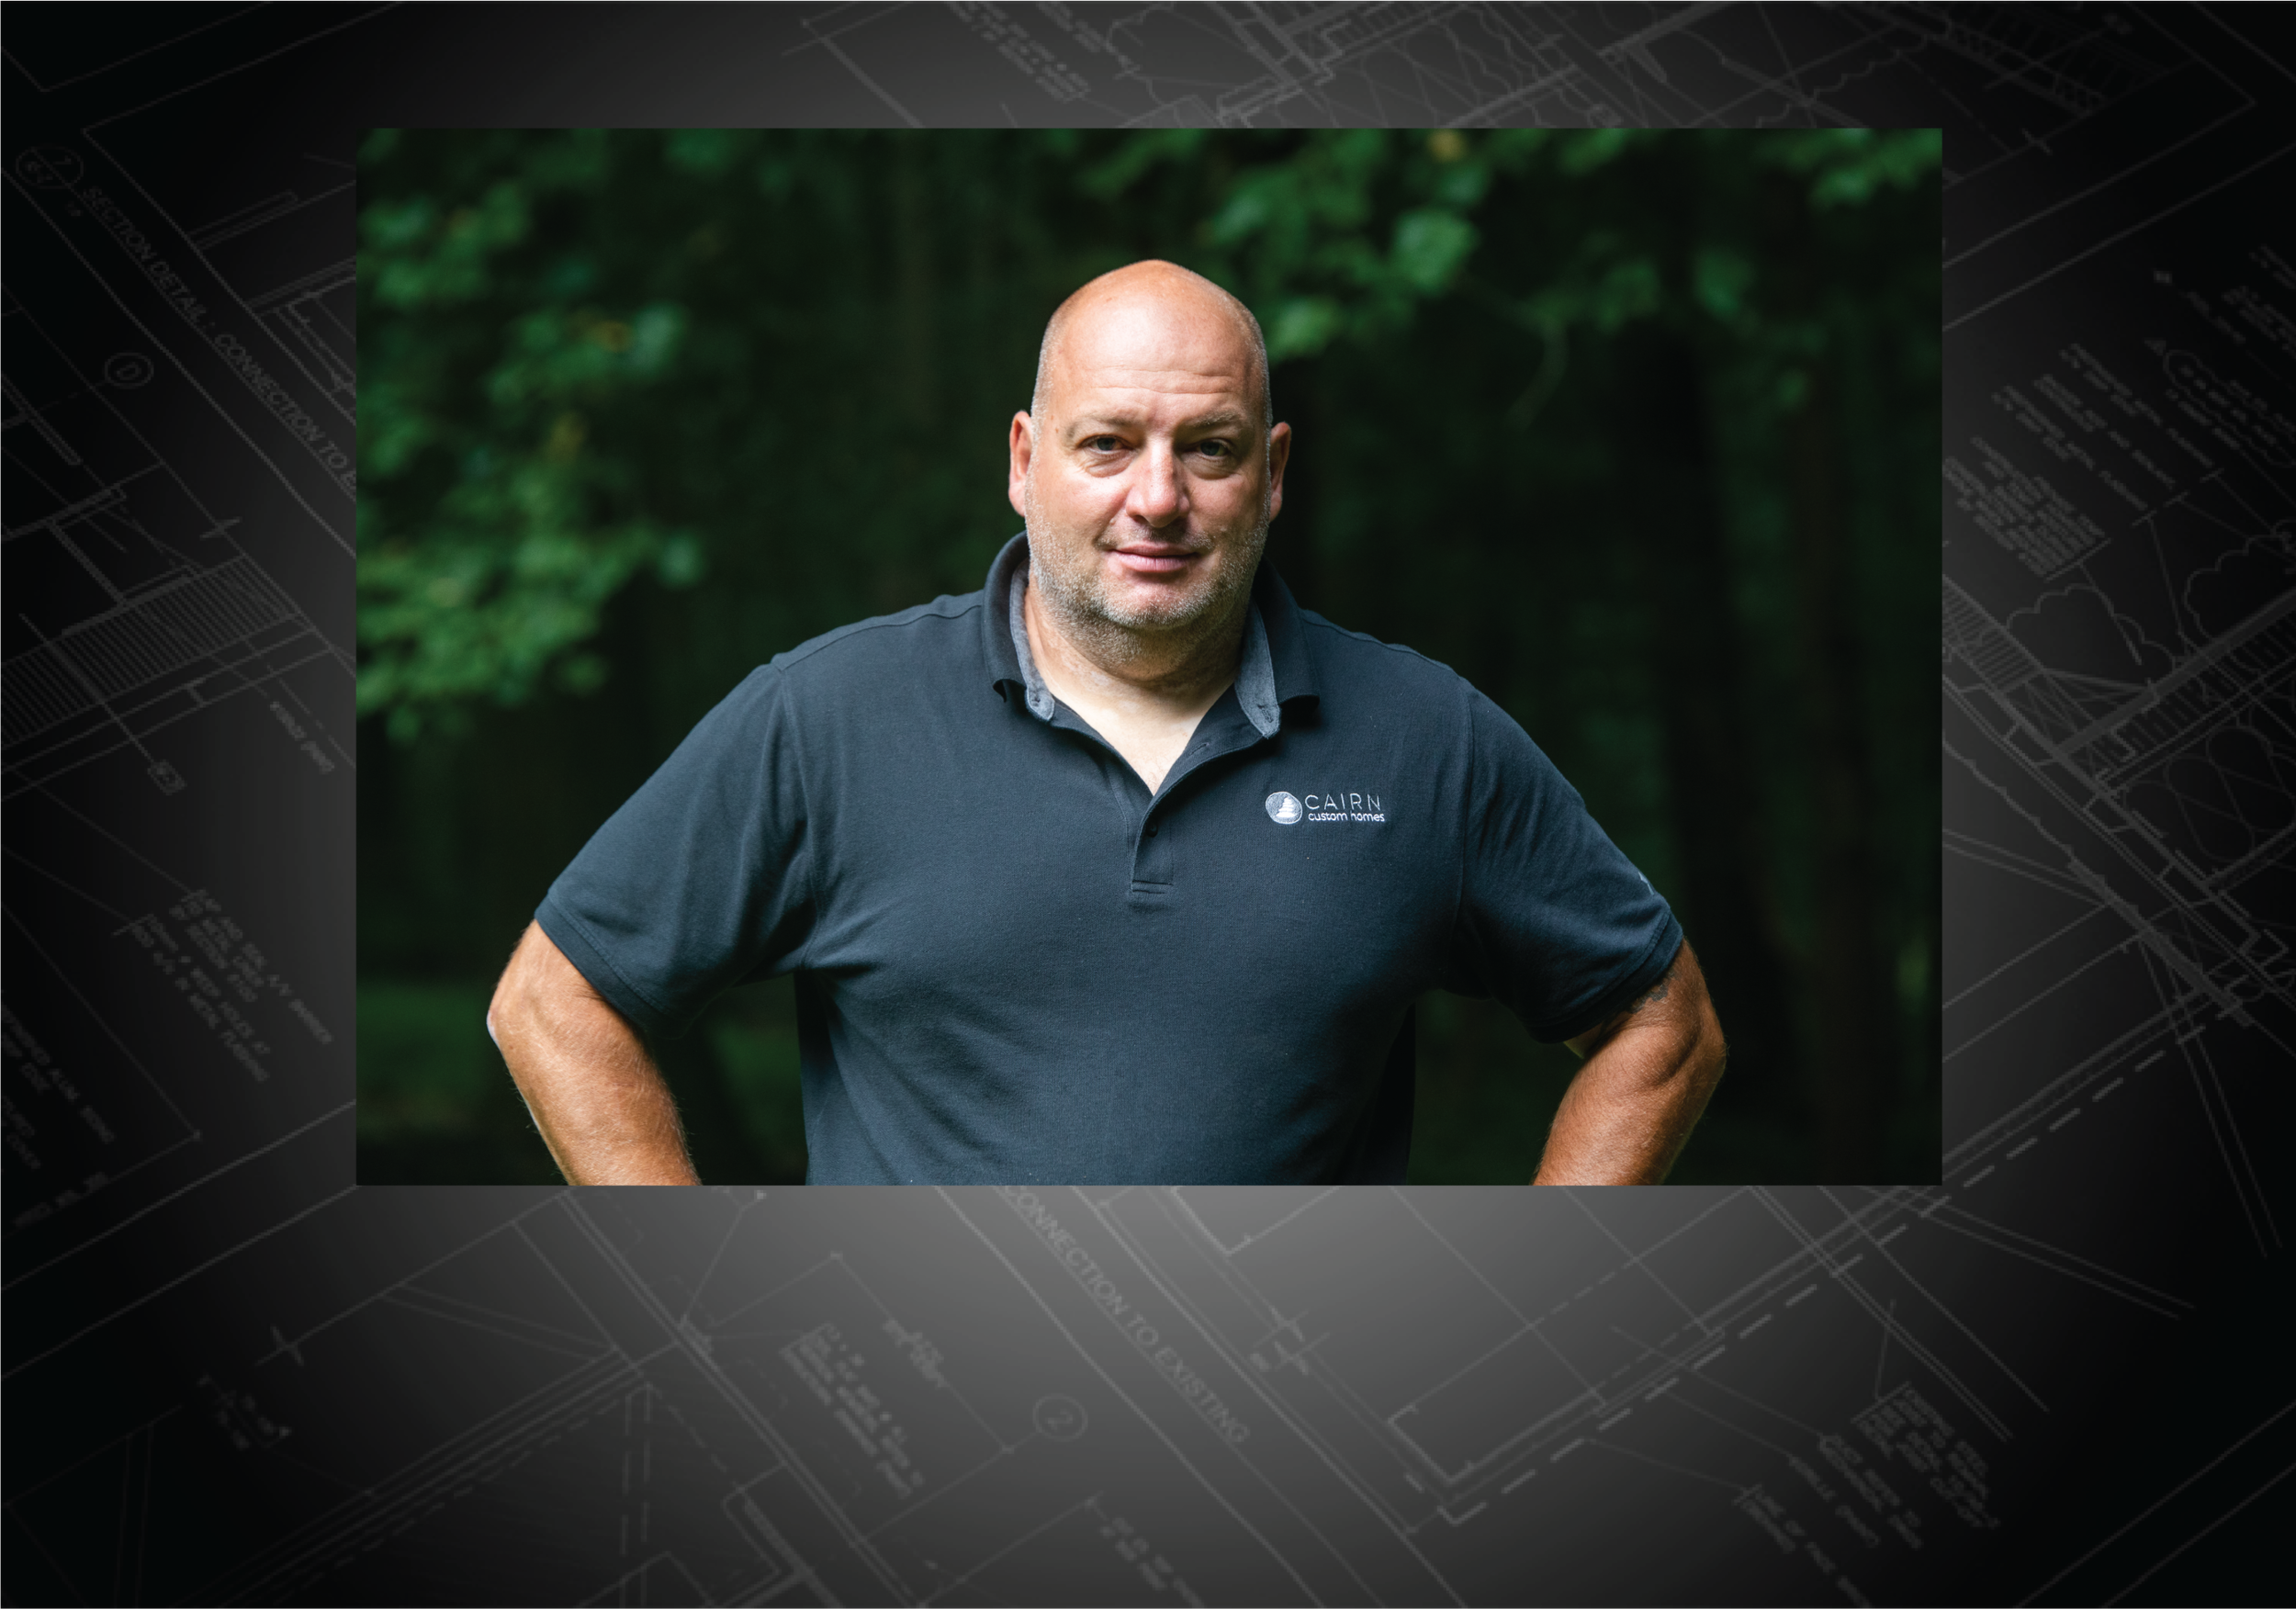  Jeff Ridgely, Project Manager  Jeff has over 18 years in the construction industry, a majority of that time spent as a Project Manager, overseeing every aspect of the building process. He understands the complexities and extreme level of detail that